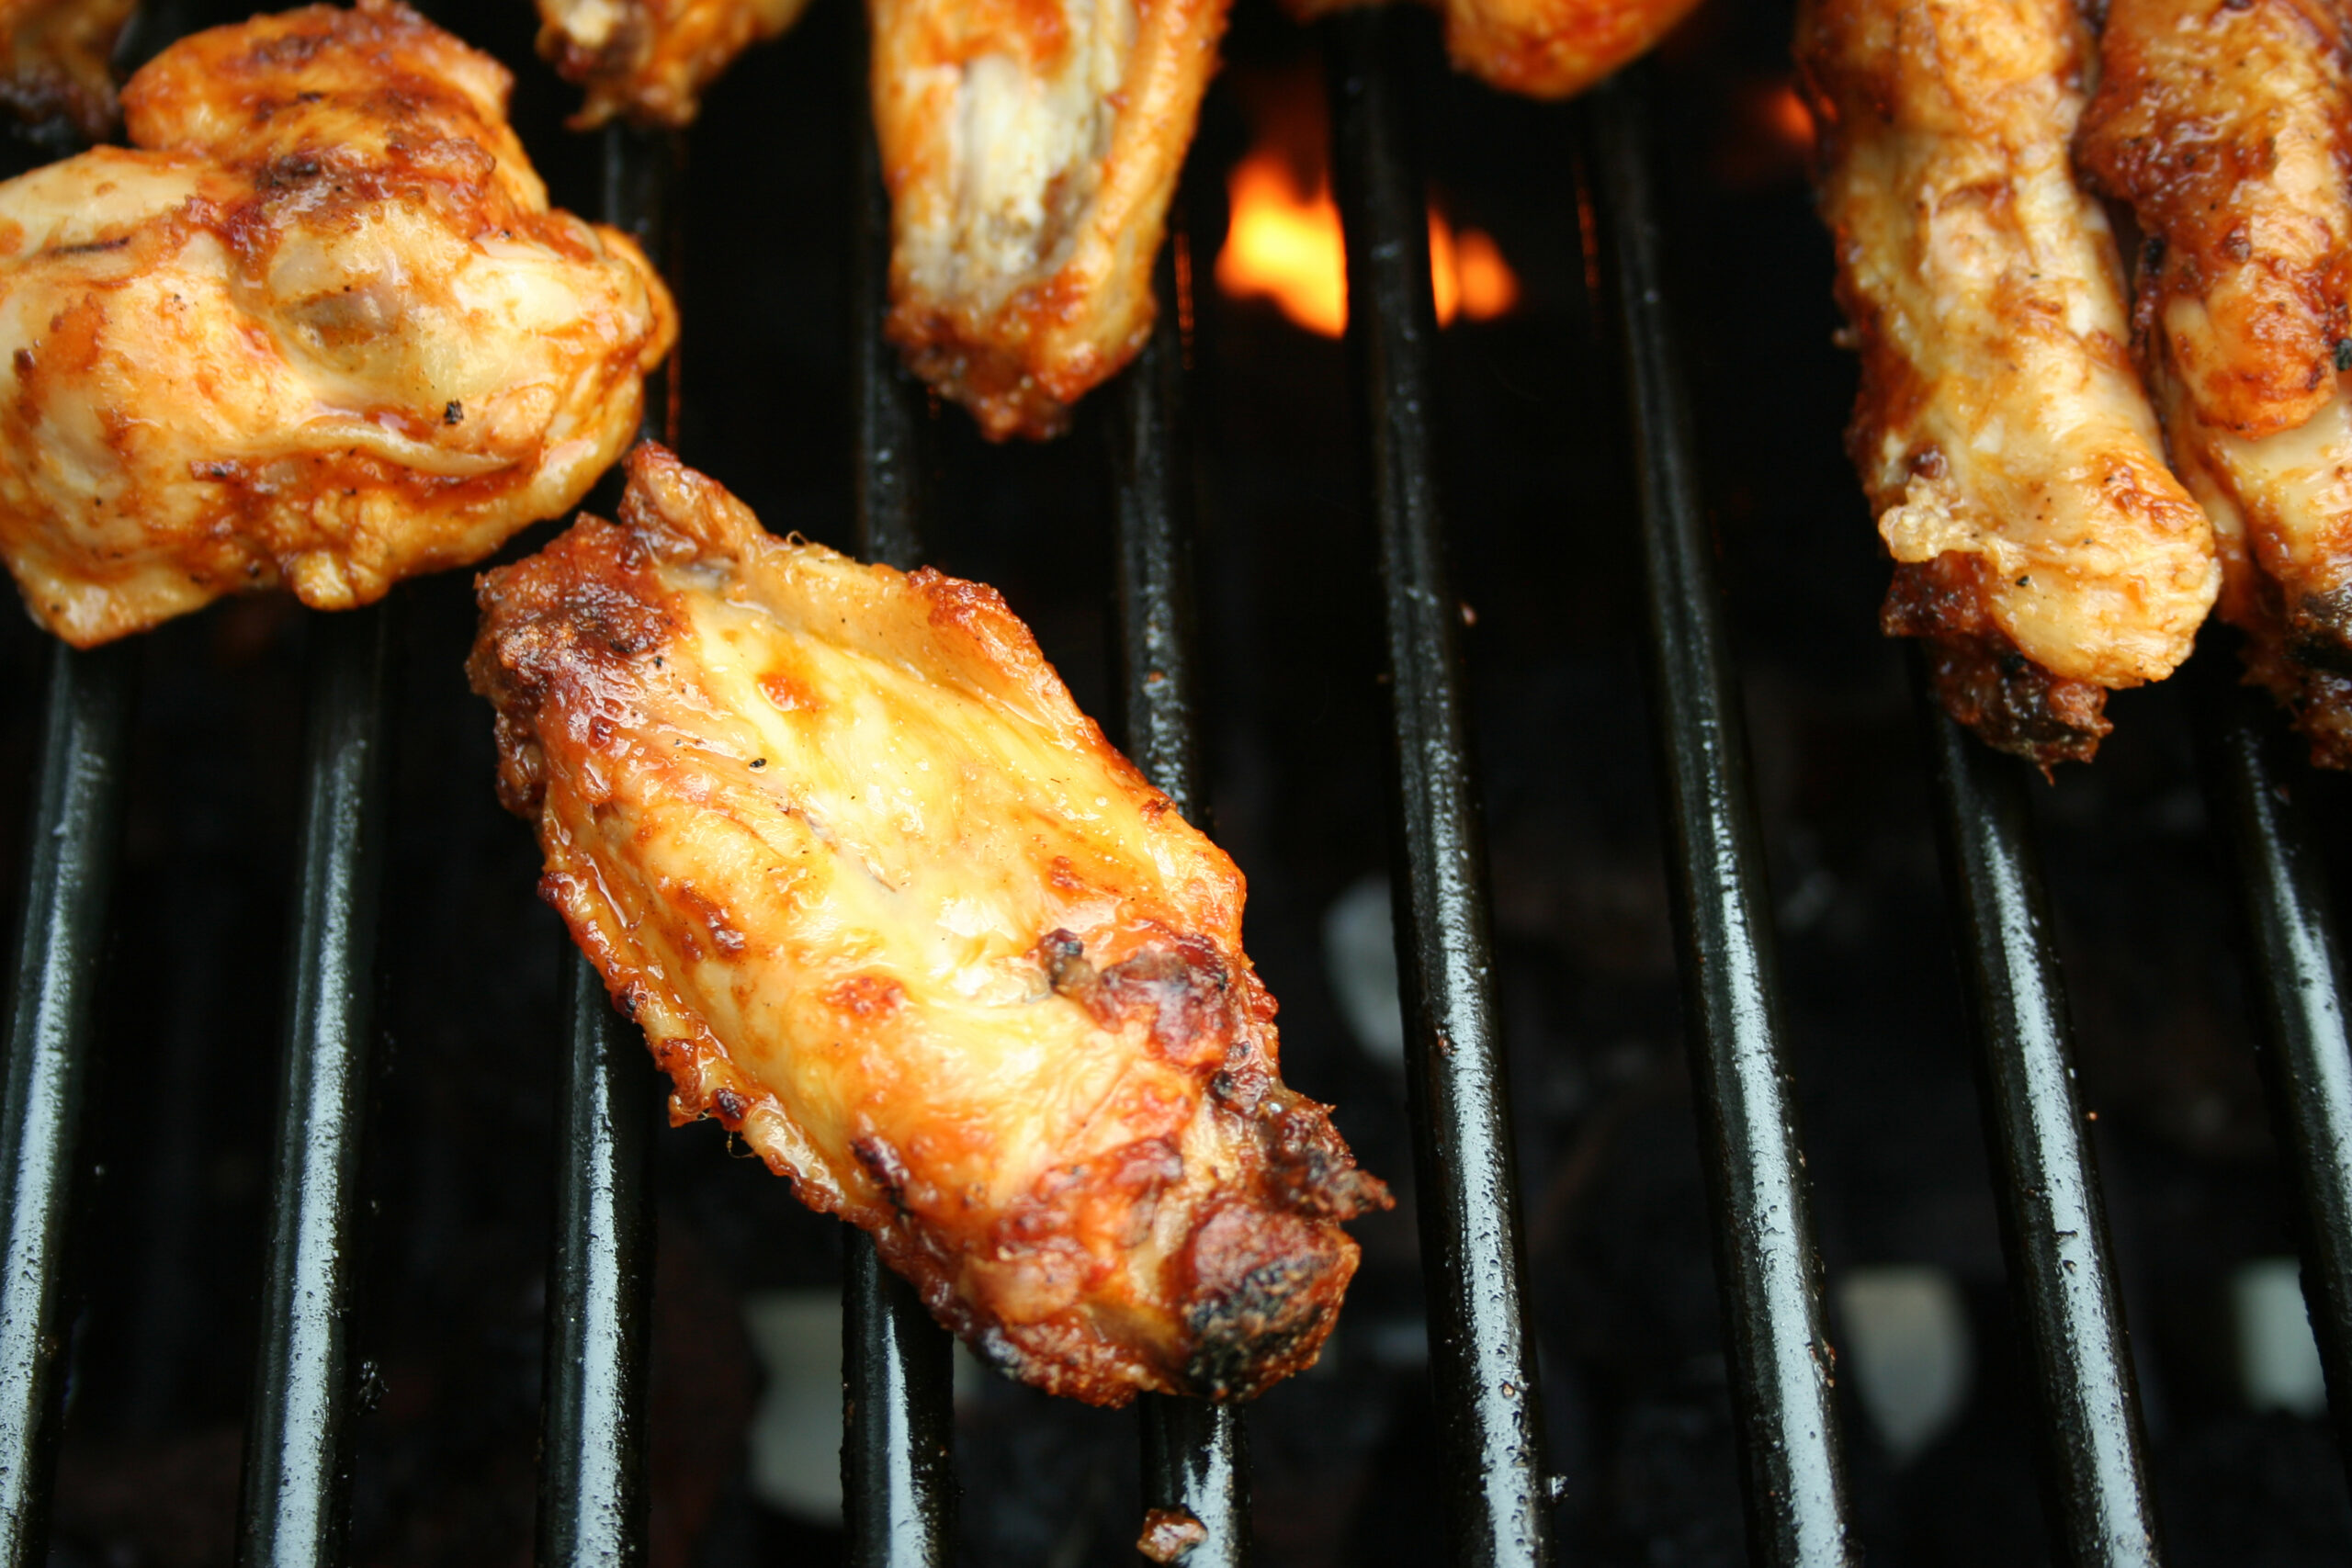 chicken wings cooking on the grill 2021 08 26 16 21 35 utc scaled